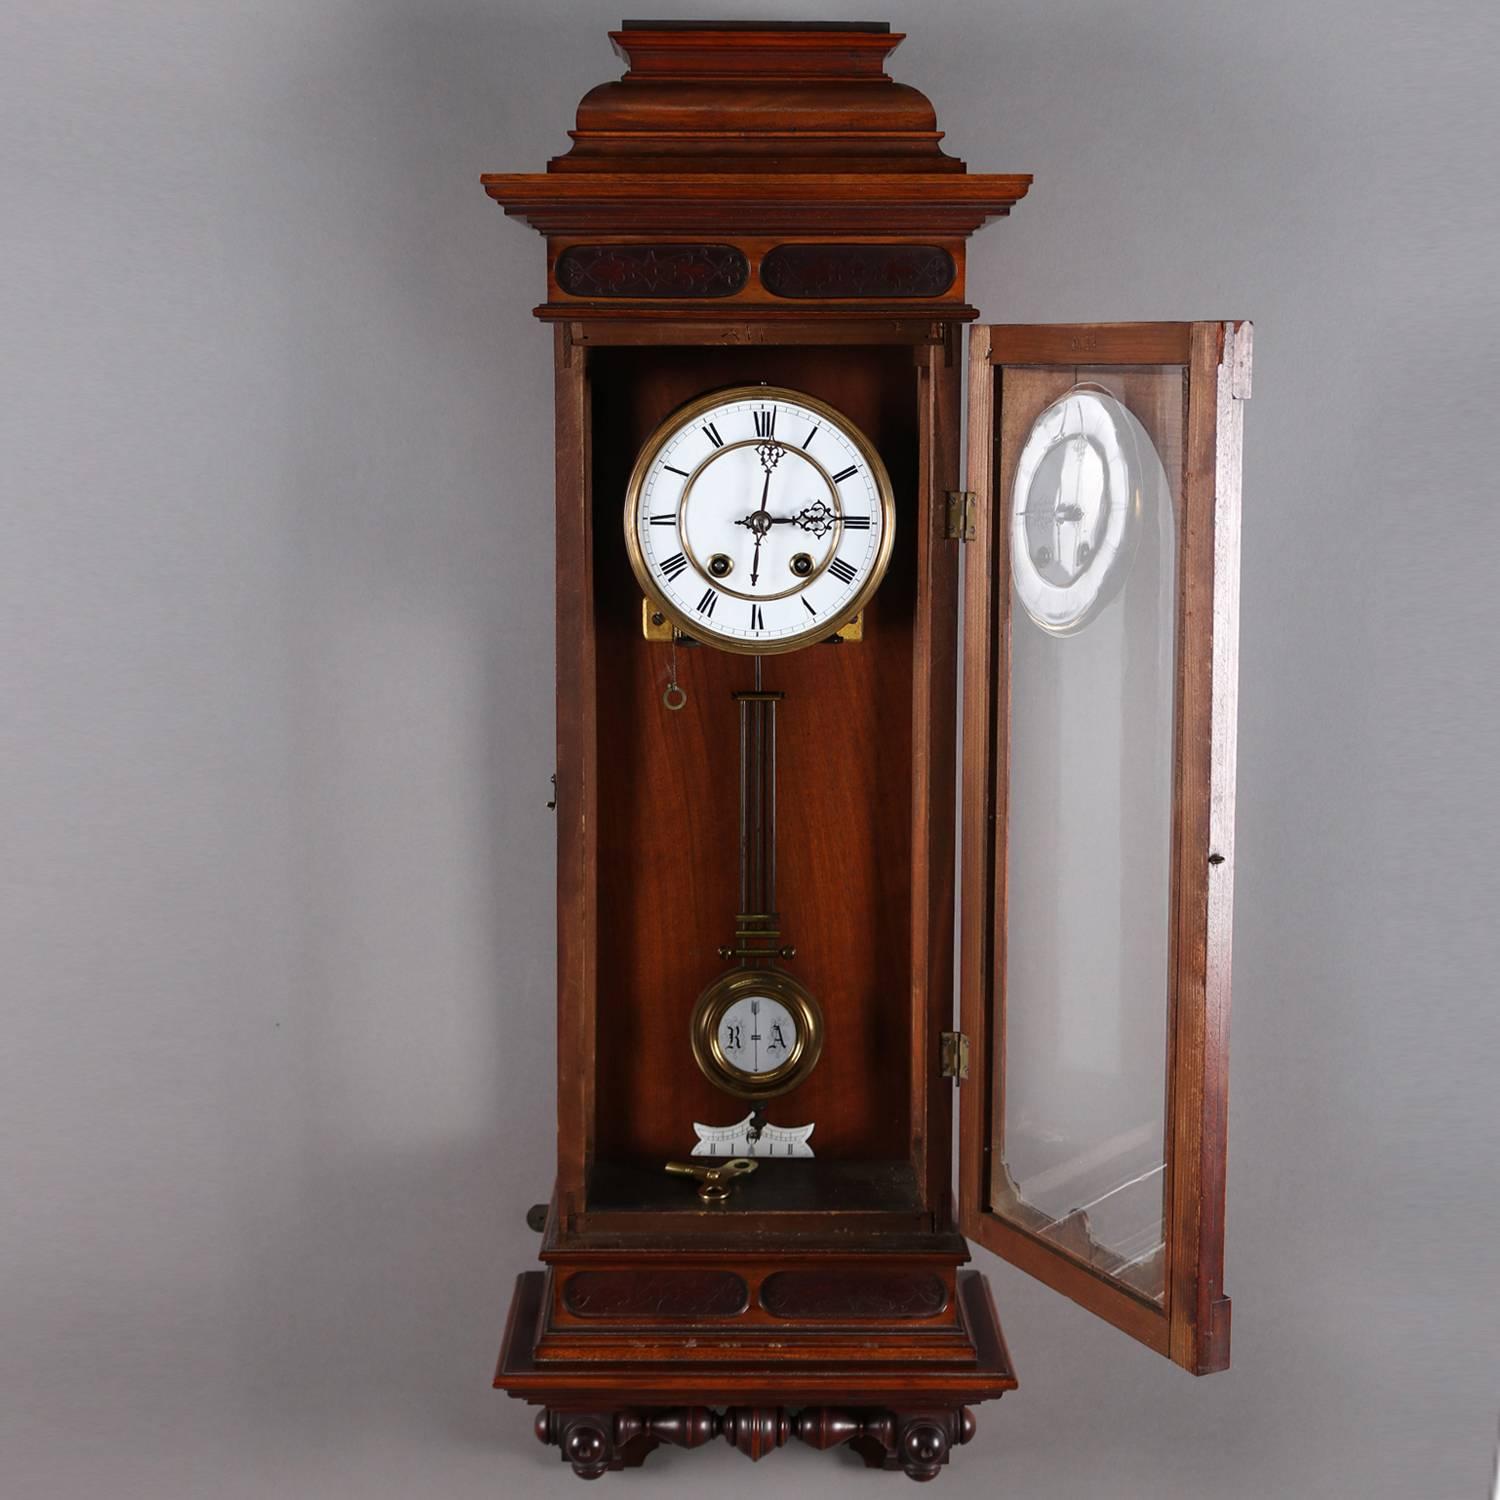 Antique carved walnut Vienna regulator wall clock features stepped crest with scroll decorated incised border above case with glass door framed in incised and gilt bordering and opening to works with clock face having Roman numerals and adjustable